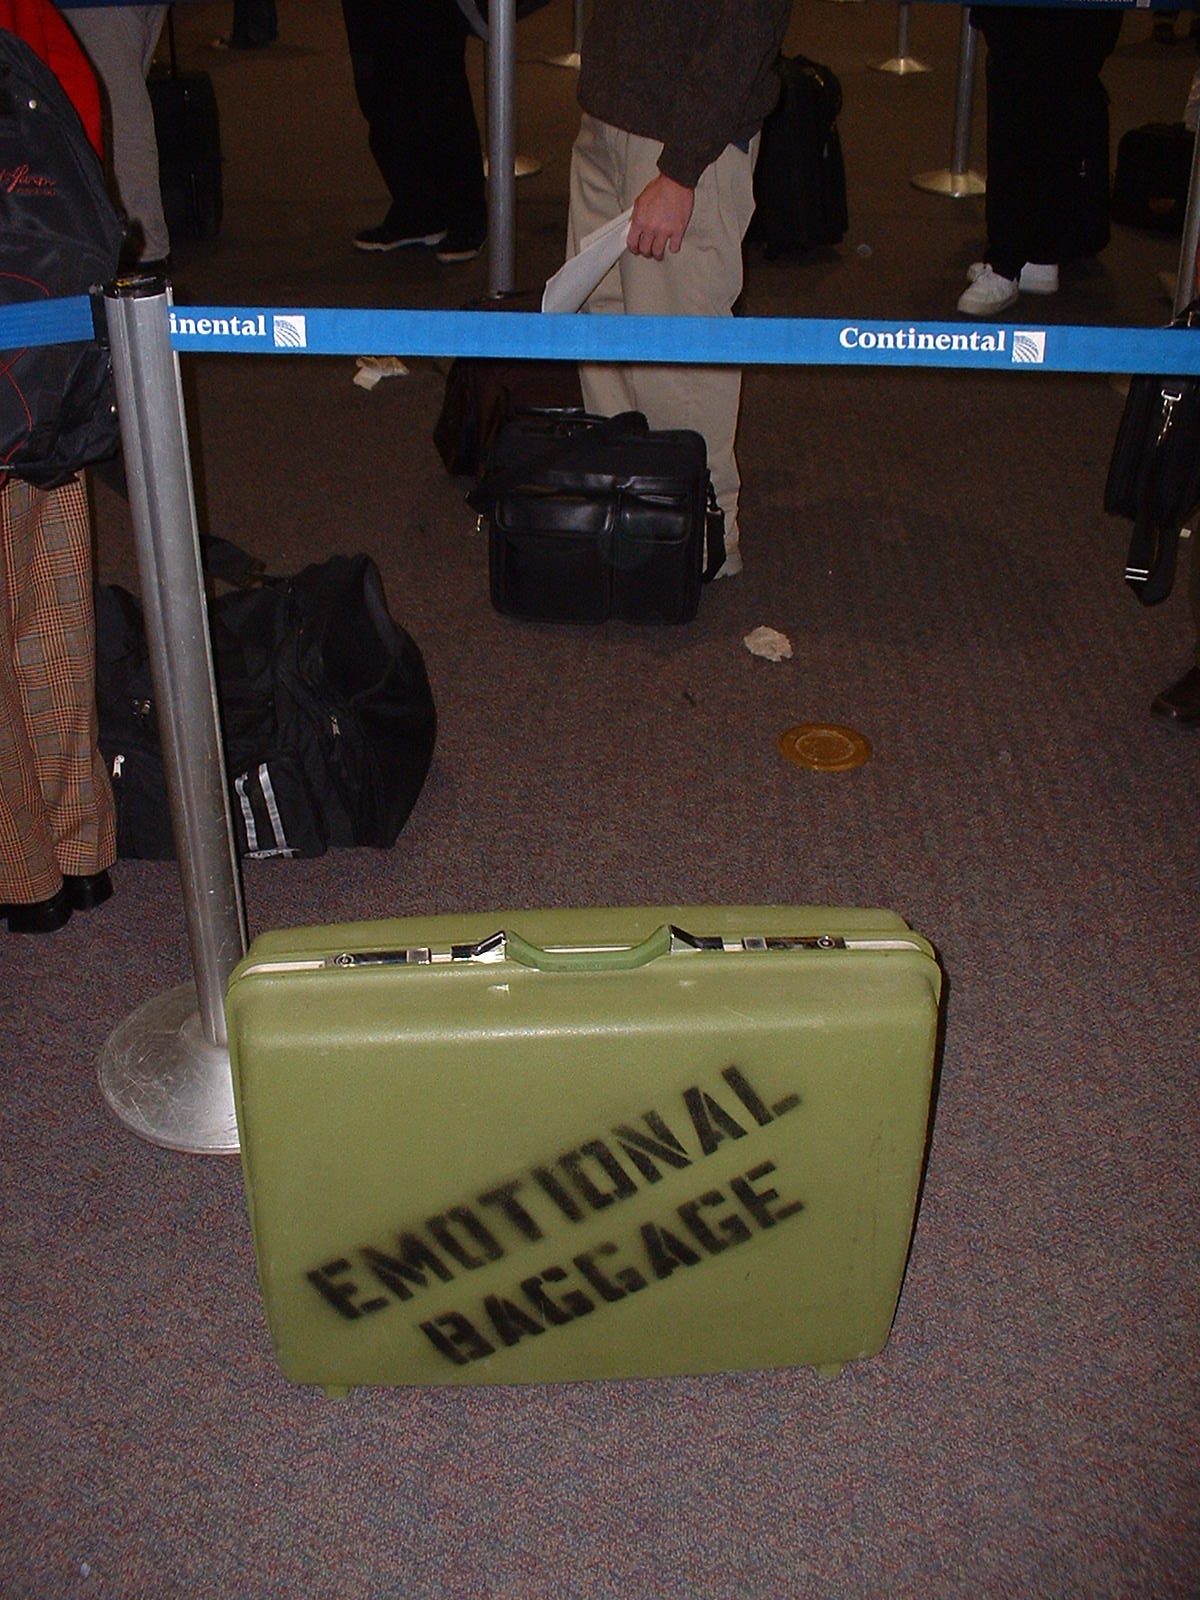 Image: Retro green suitcase with 'Emotional Baggage' stenciled on side in check-in line.